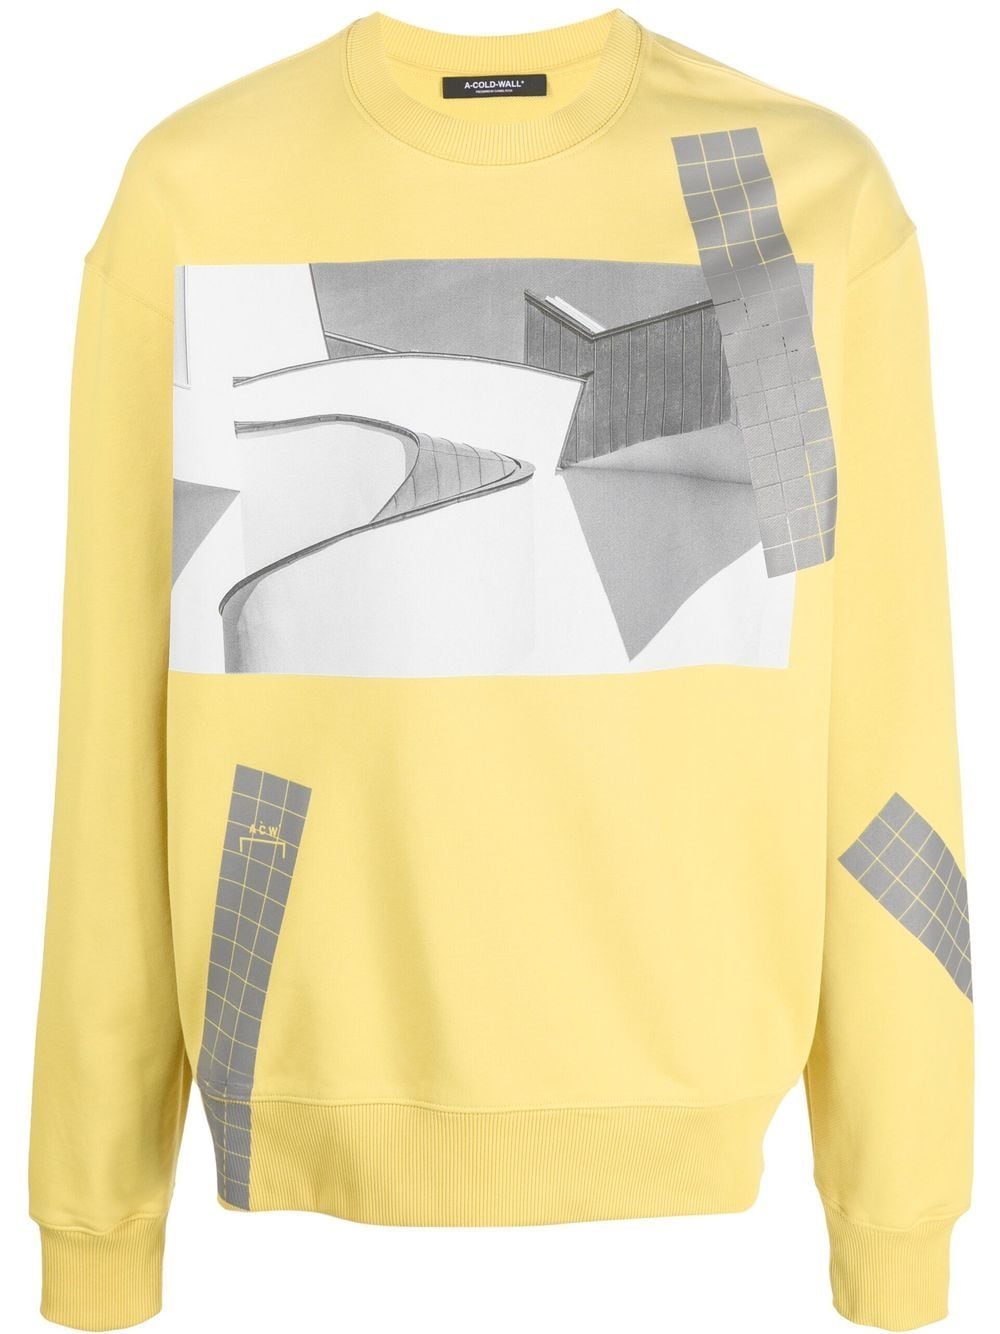 A-COLD-WALL* grid graphic print sweatshirt - Yellow von A-COLD-WALL*